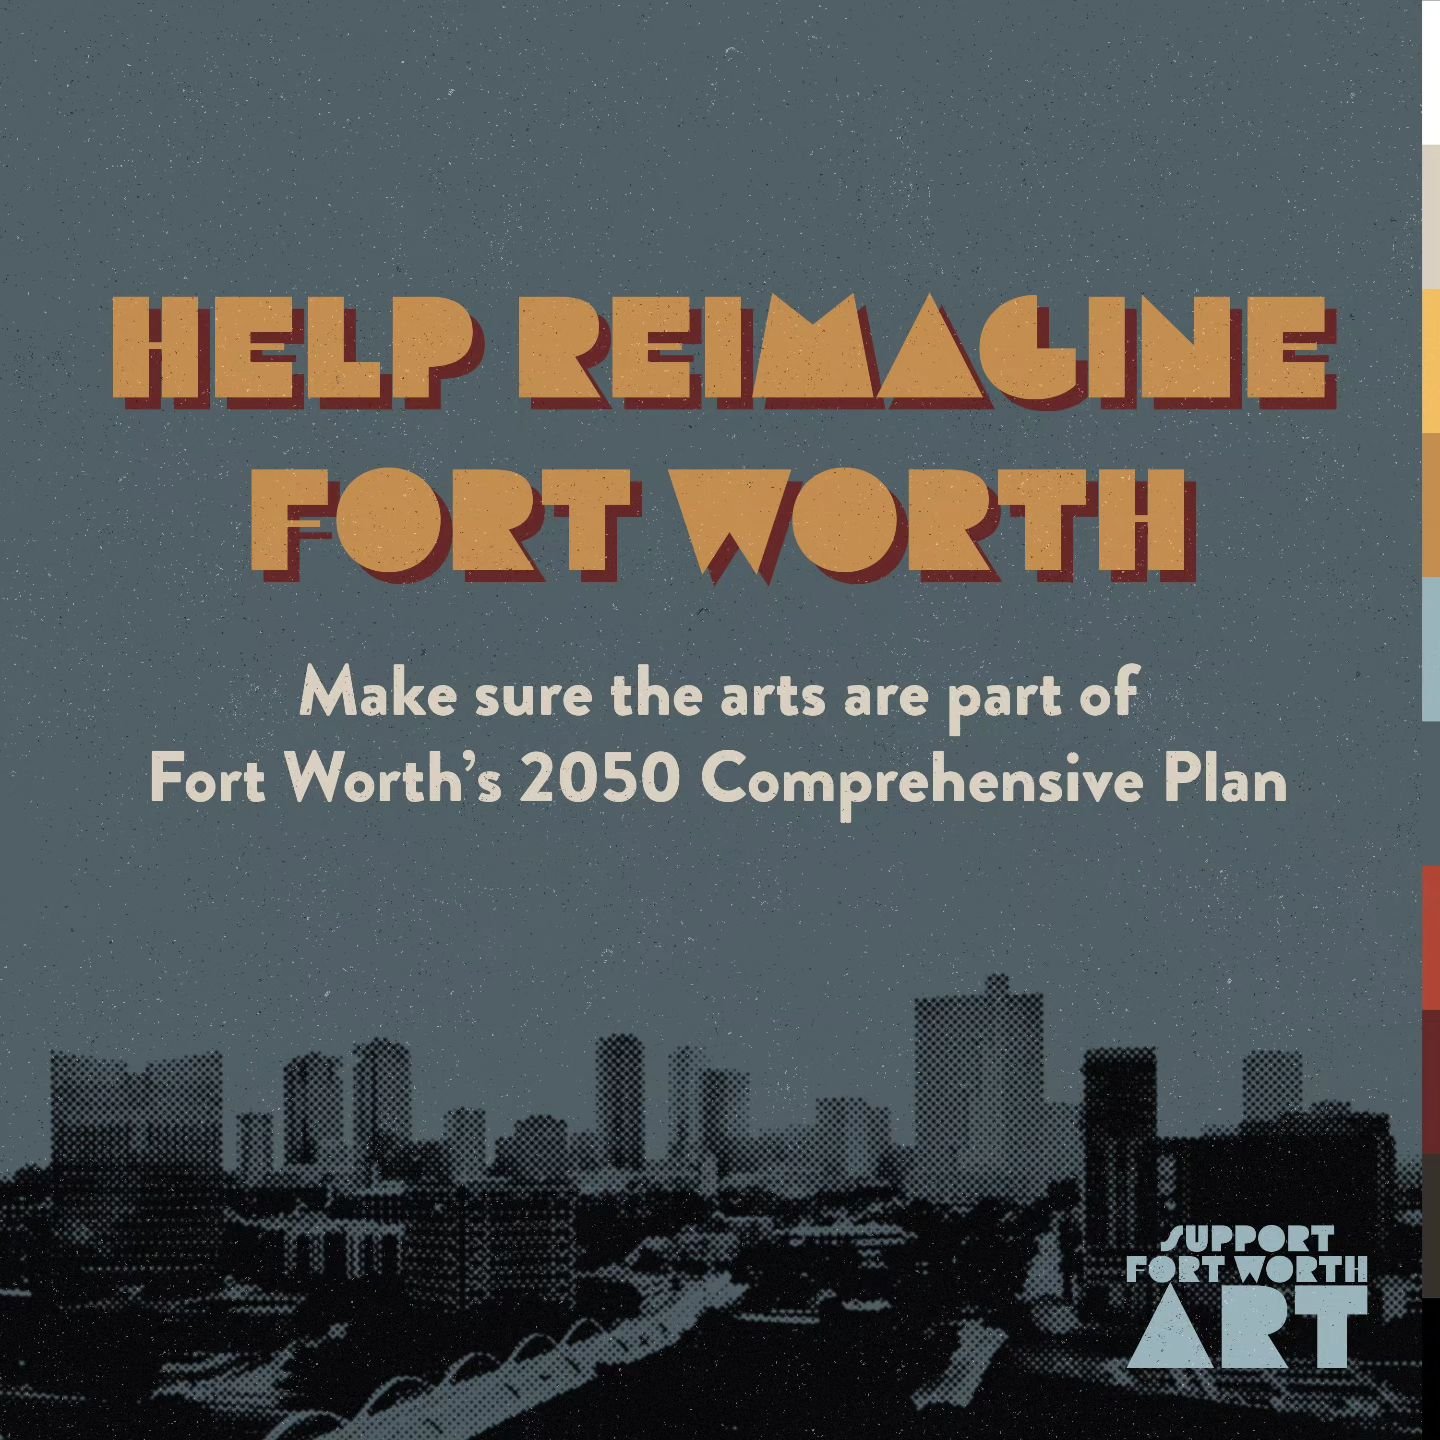 Did you know that the city of Fort Worth is updating their Comprehensive Plan? This is your chance to help the city envision the key role that the arts will play in the growth &amp; prosperity of Fort Worth. Check out the link in our bio for more inf